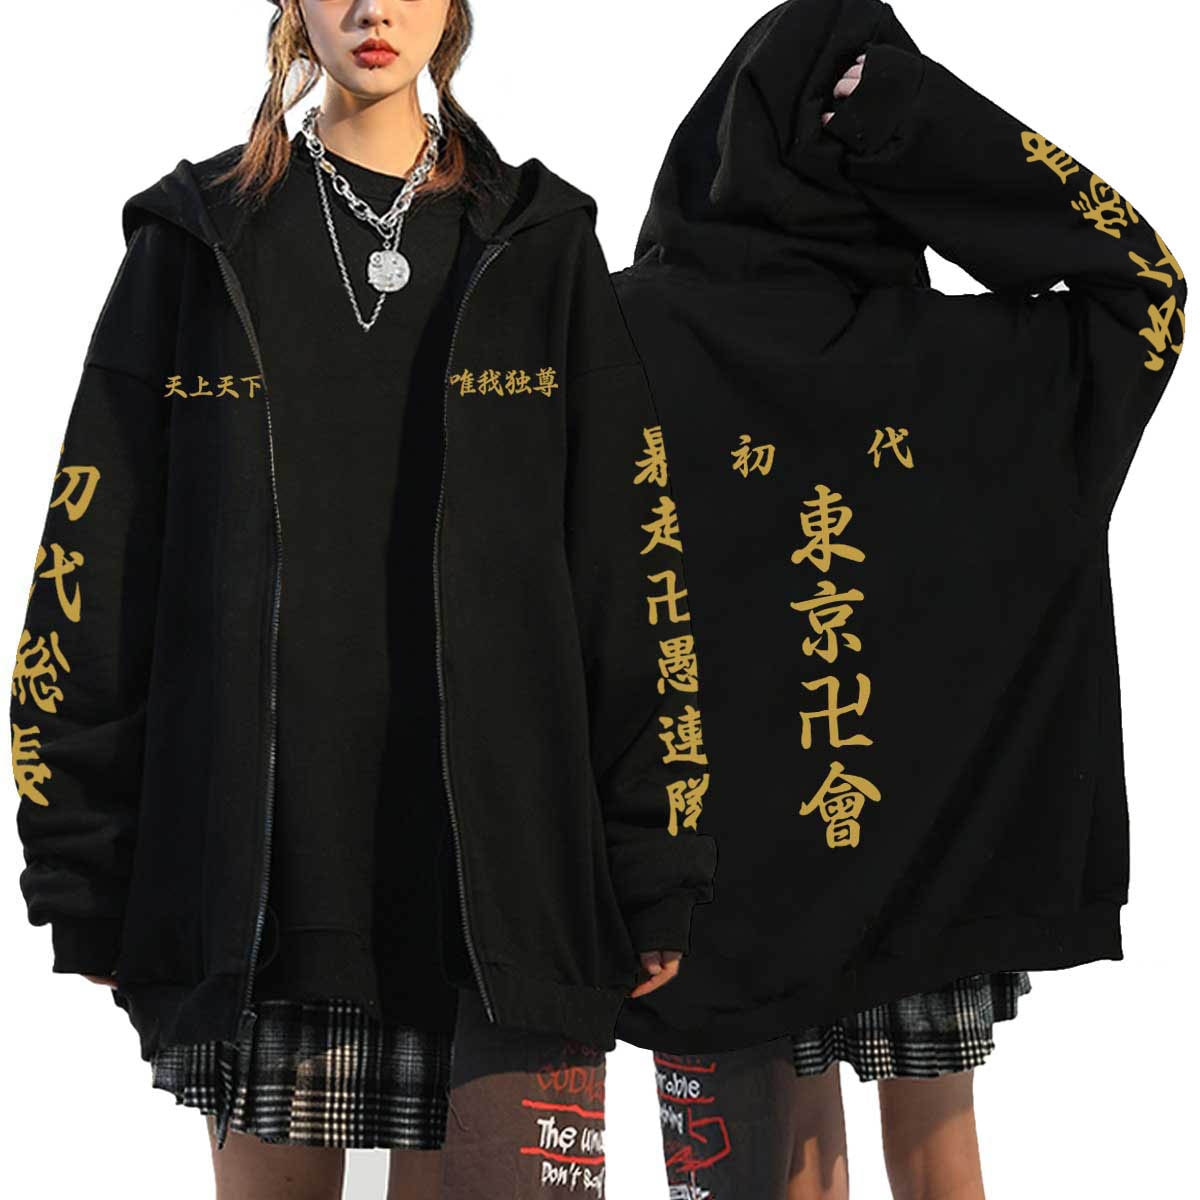 Valhalla Tokyo Revengers Hoodies Hot Anime Cosplay Pullover